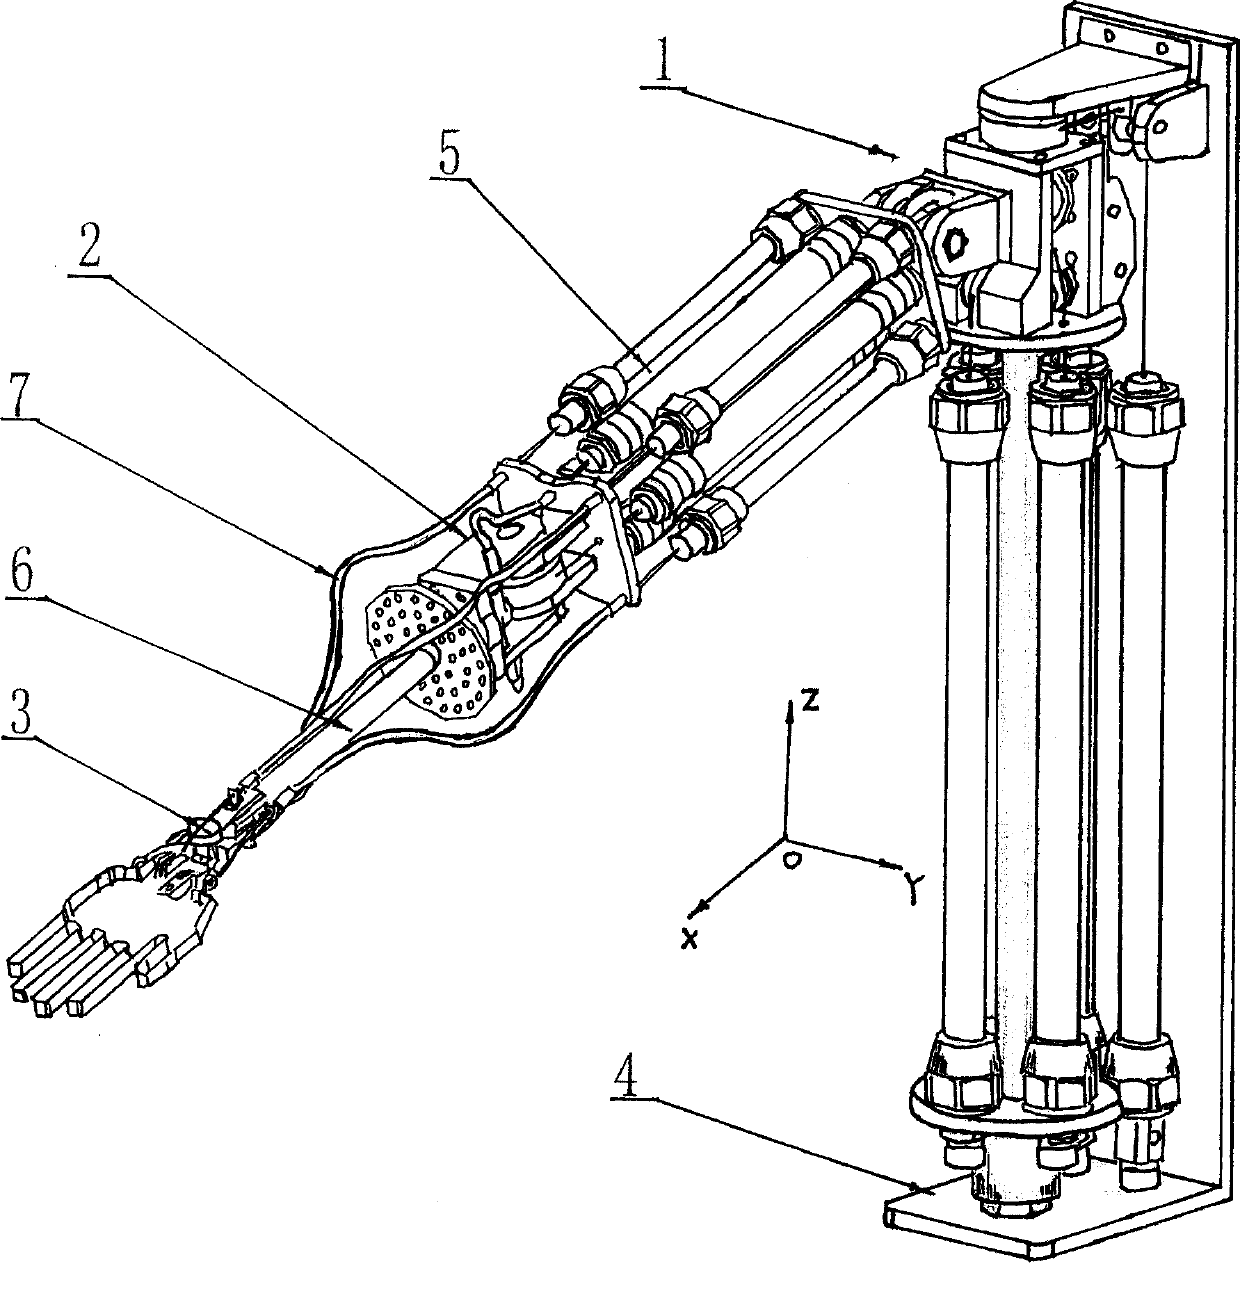 Seven freedom-degree artificial man arm driven by air-powered artificial muscle